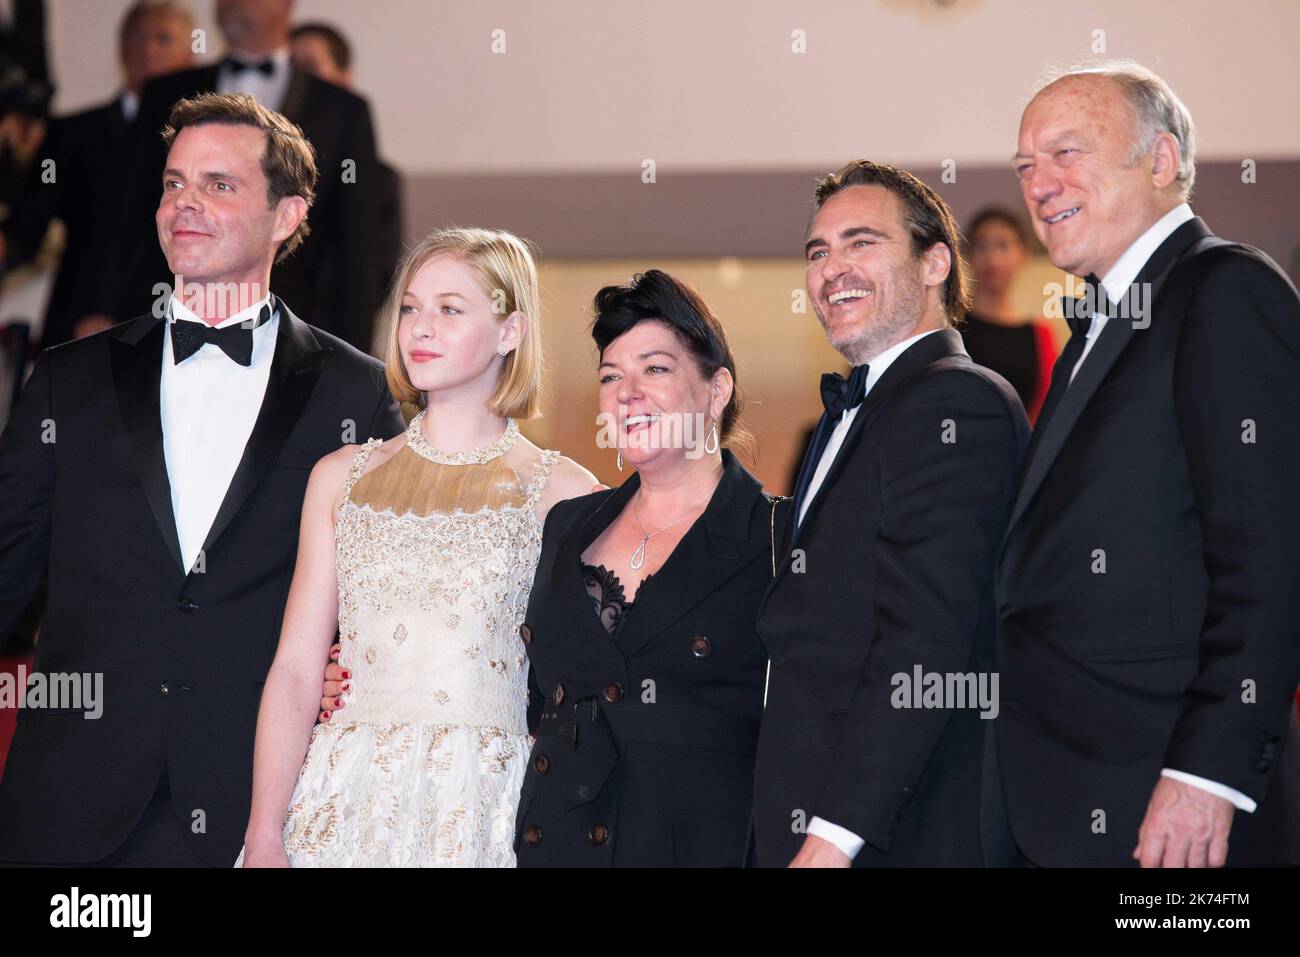 ©Quentin Veuillet/Wostok Press/Maxppp France Cannes 27/05/2017 US actor Alex Manette, Scottish director Lynne Ramsay, US actor Joaquin Phoenix and Actress Ekaterina Samsonov arrive for the premiere of 'You Were Never Really Here' during the 70th annual Cannes Film Festival, in Cannes Stock Photo